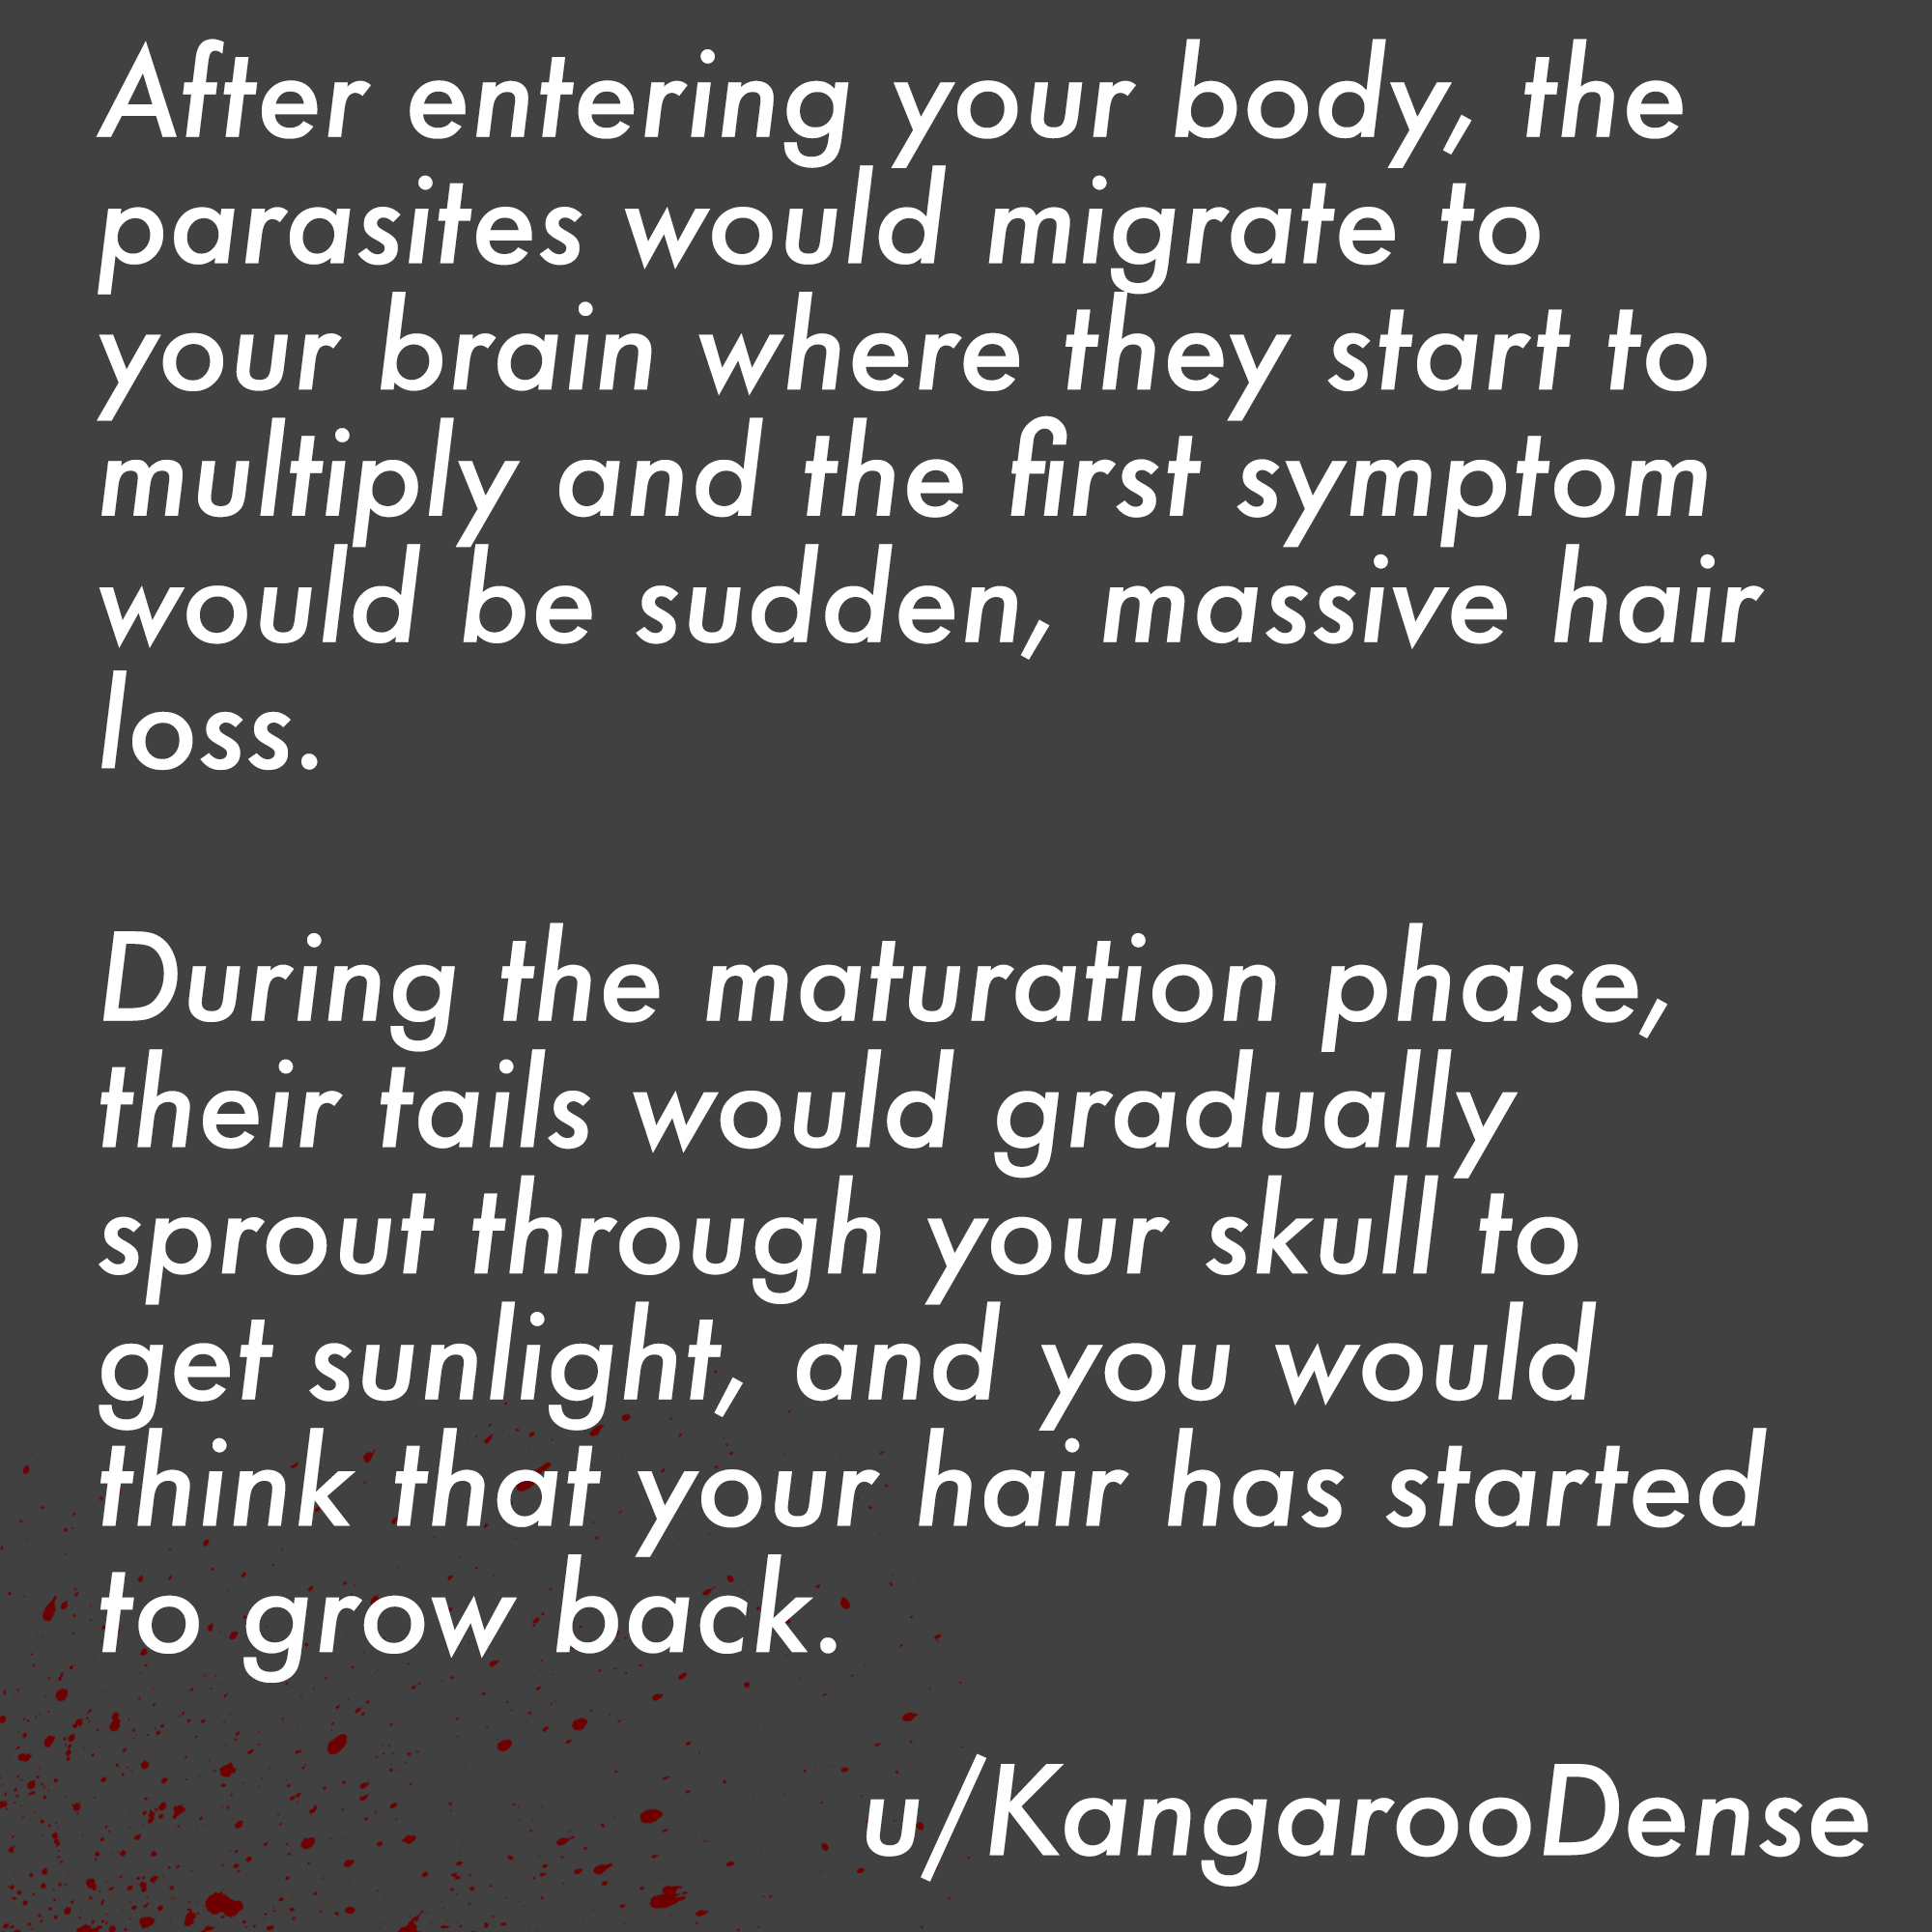 two line horror stories - casey keegan - After entering your body, the parasites would migrate to your brain where they start to multiply and the first symptom would be sudden, massive hair loss. During the maturation phase, their tails would gradually sp